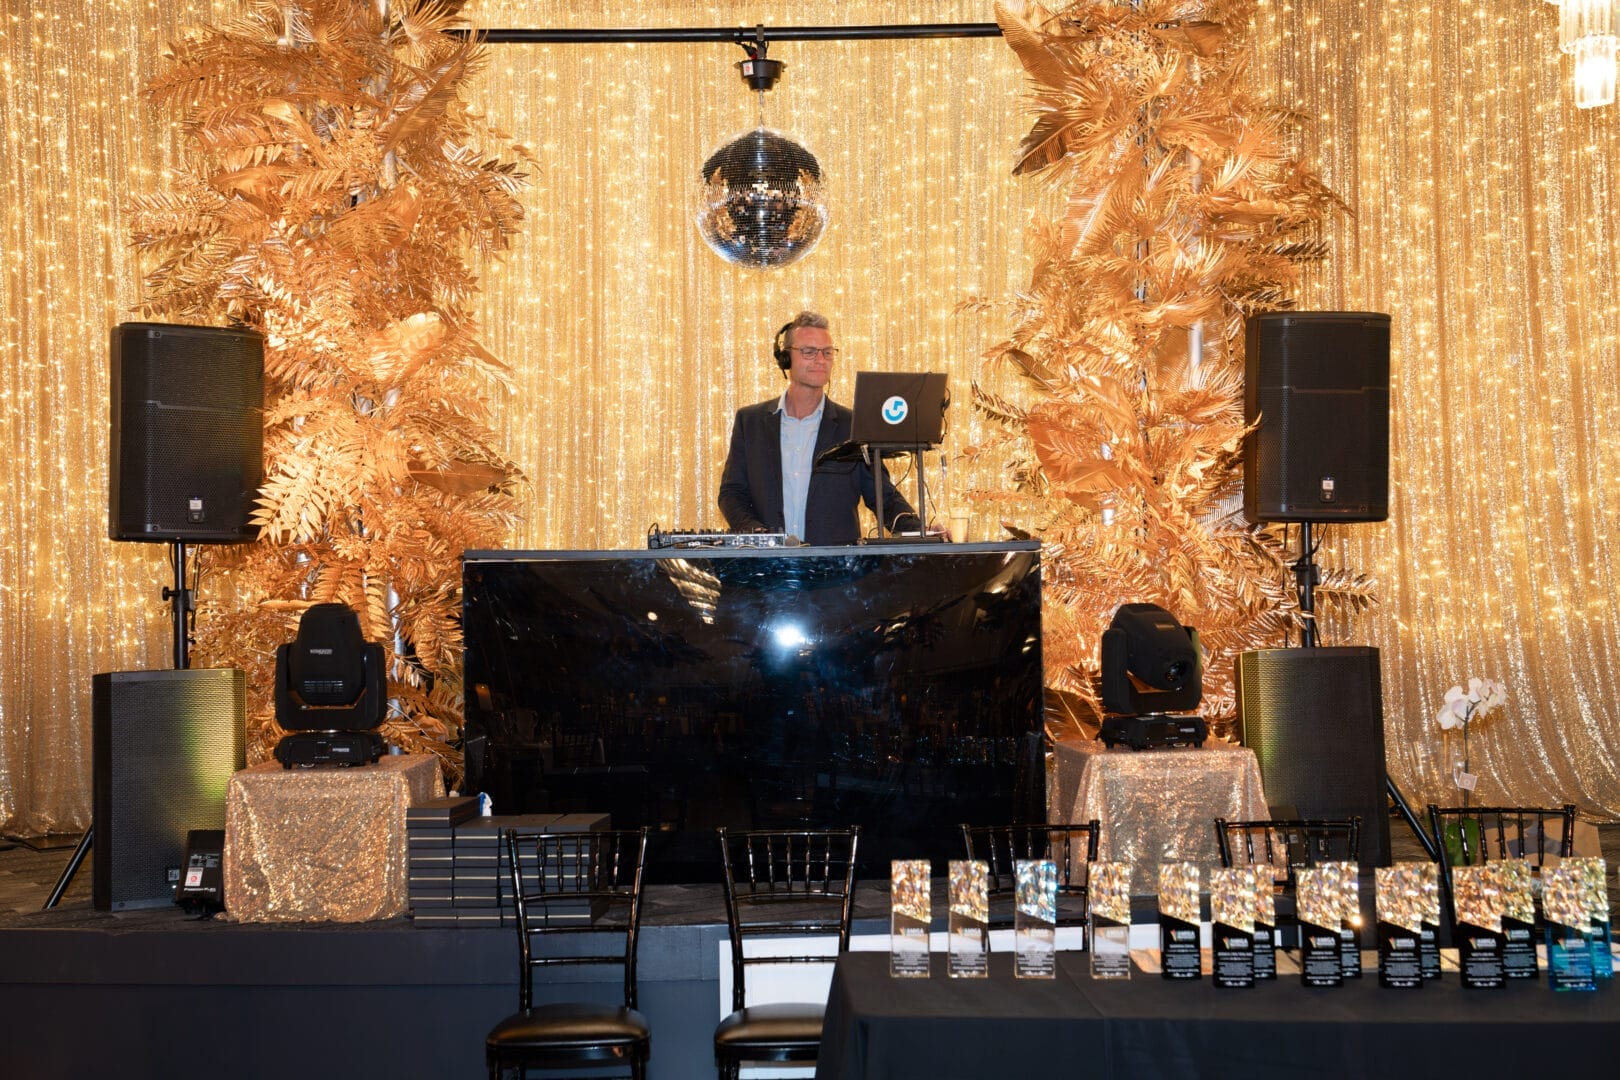 DJ booth with gold leaf and floral installation and gold drape and fairy light backdrop